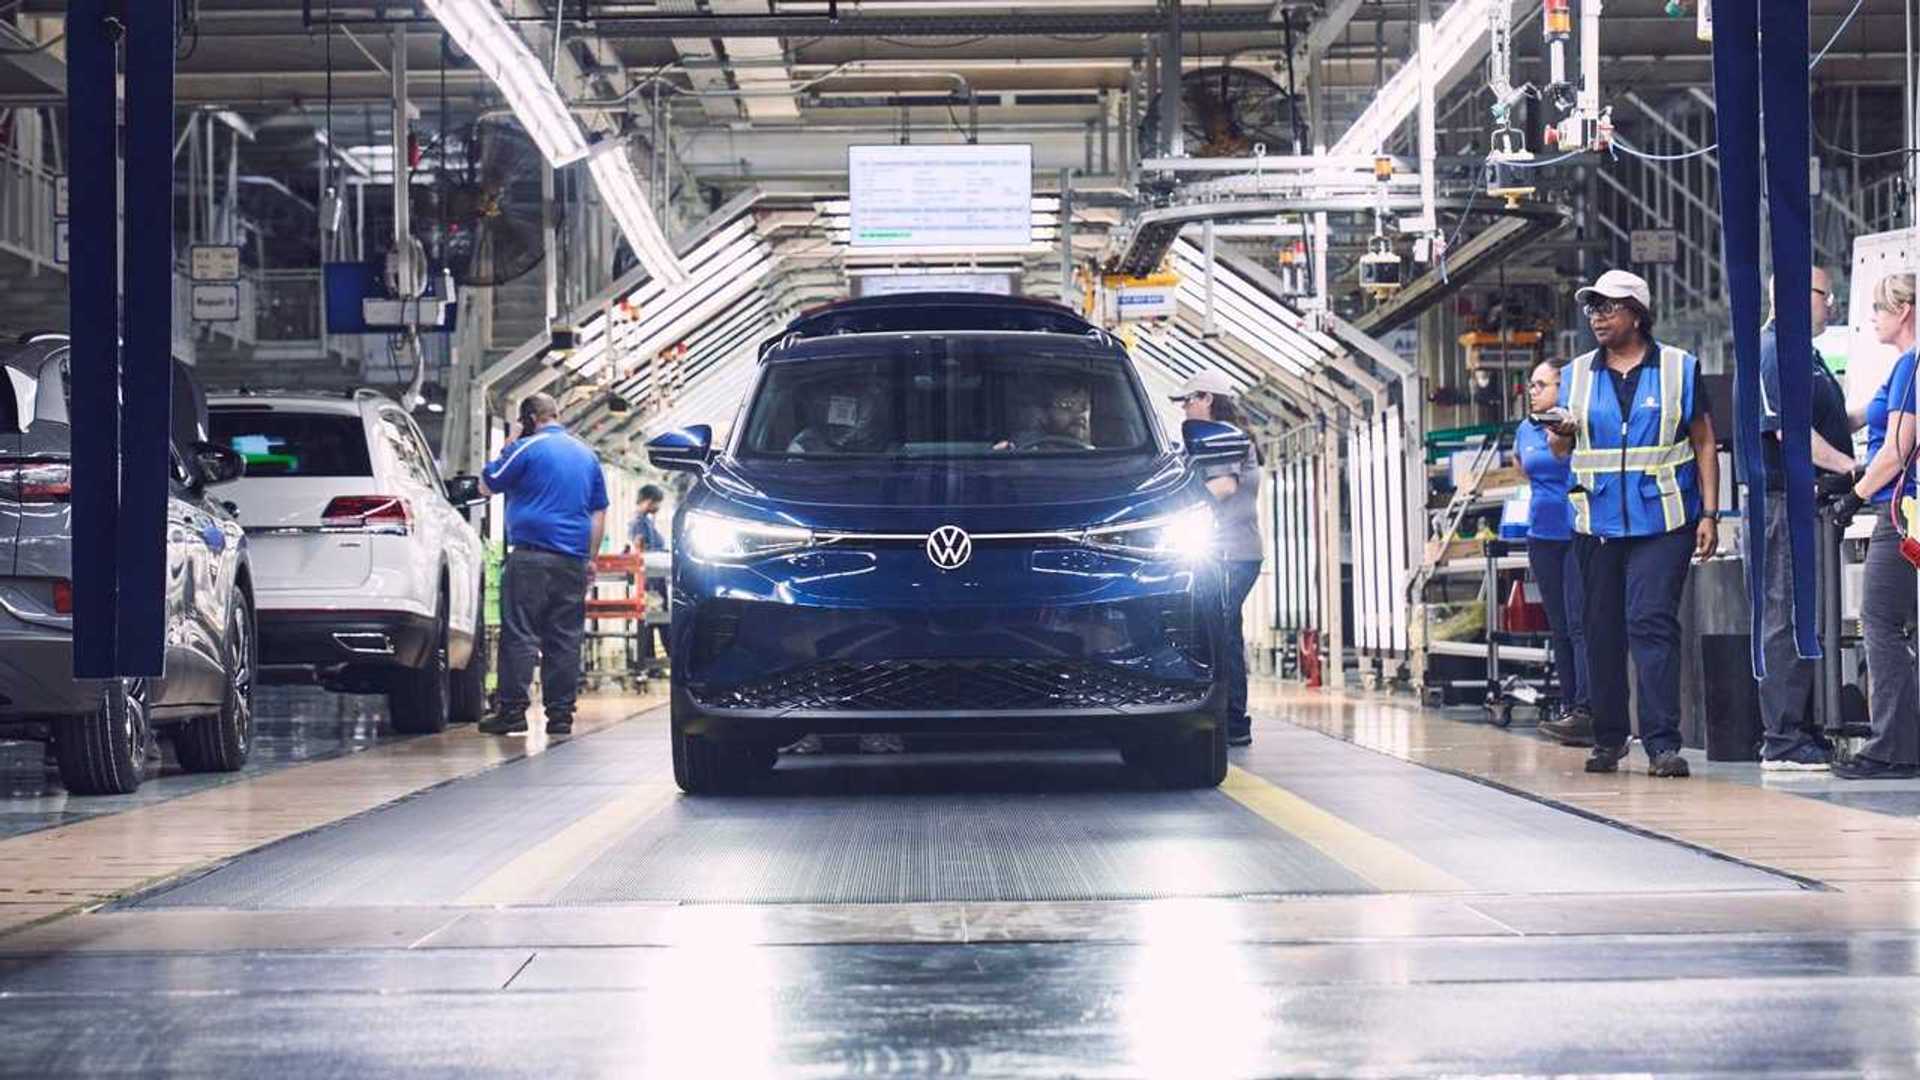 vw group to launch 25 new bevs in us by 2030, double market share